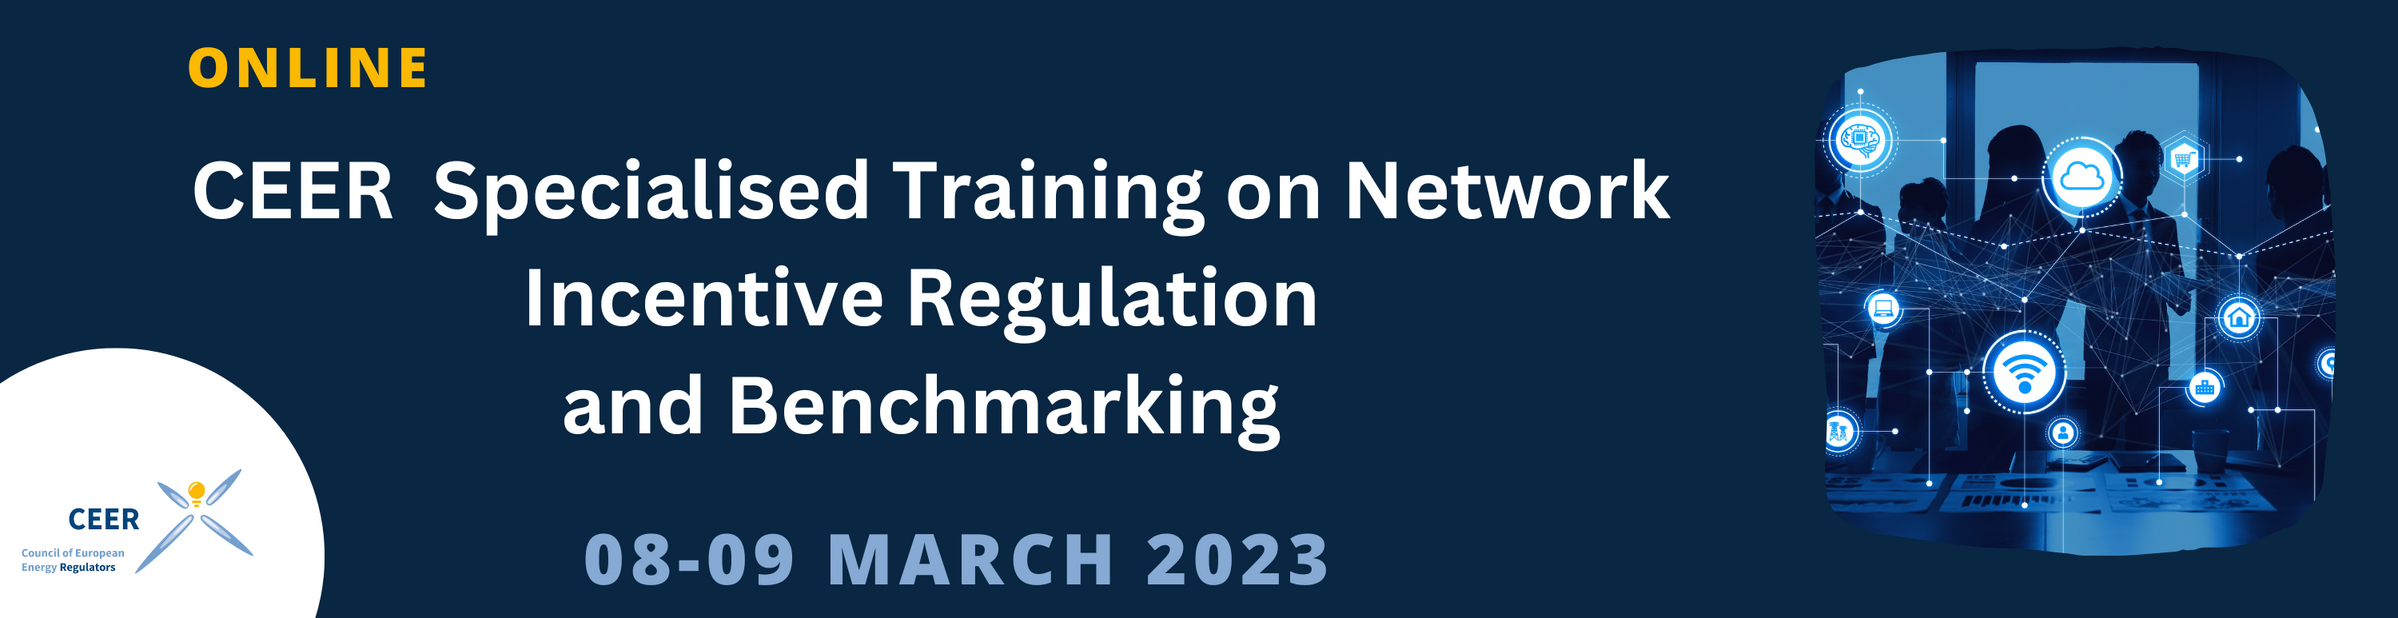 Specialised Training on Network Incentive Regulation and Benchmarking